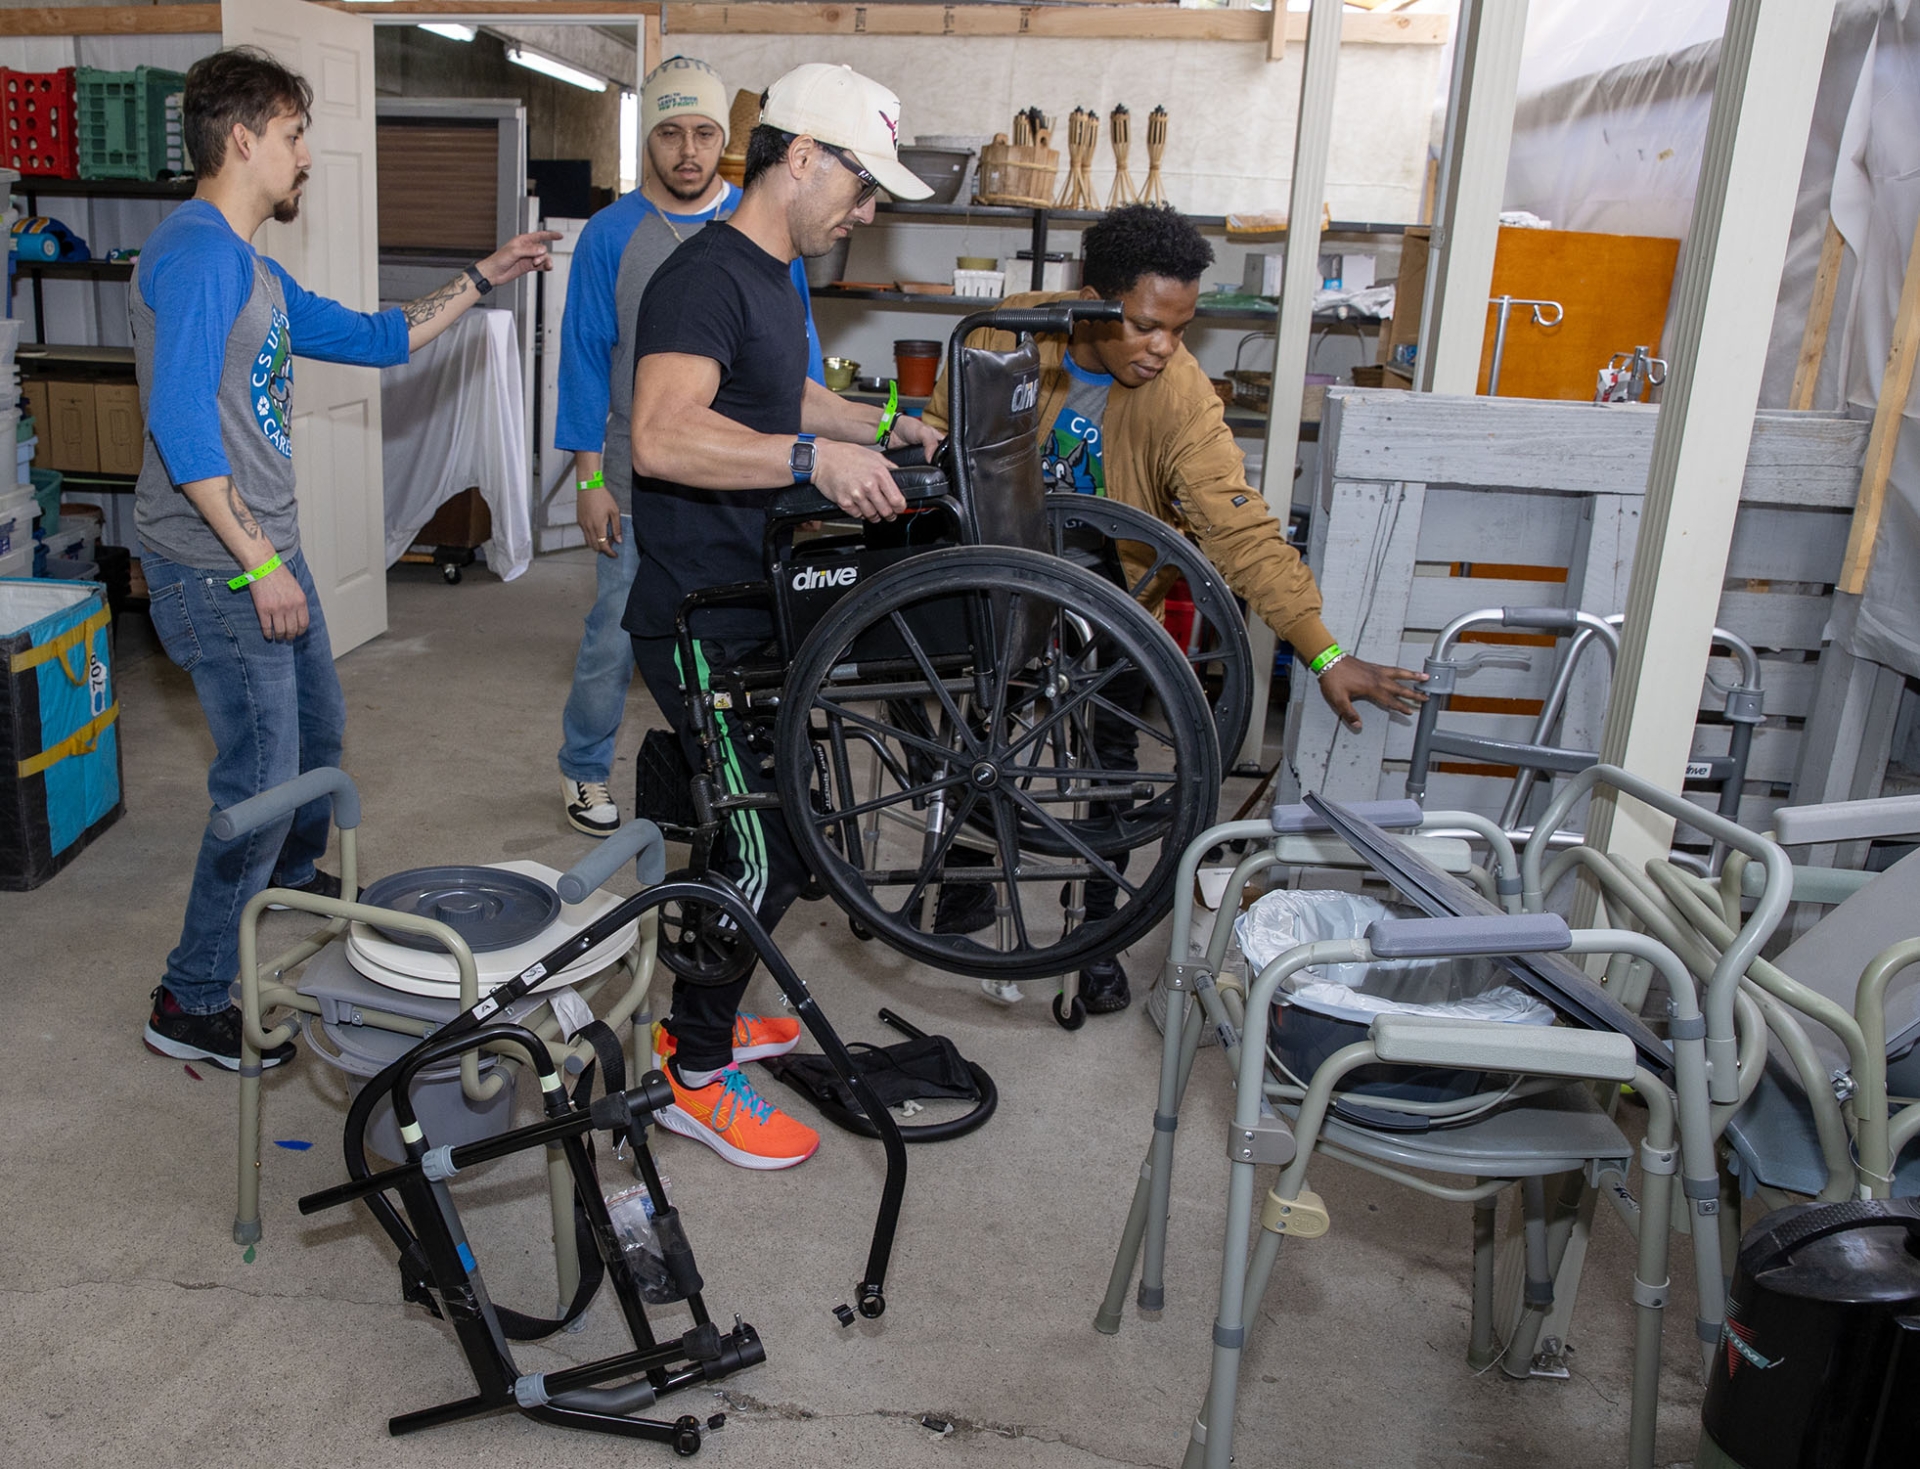 A group of volunteers helps organize wheelchairs and other equipment at a San Bernardino-area agency as part of CSUSB’s annual Coyote Cares Day.